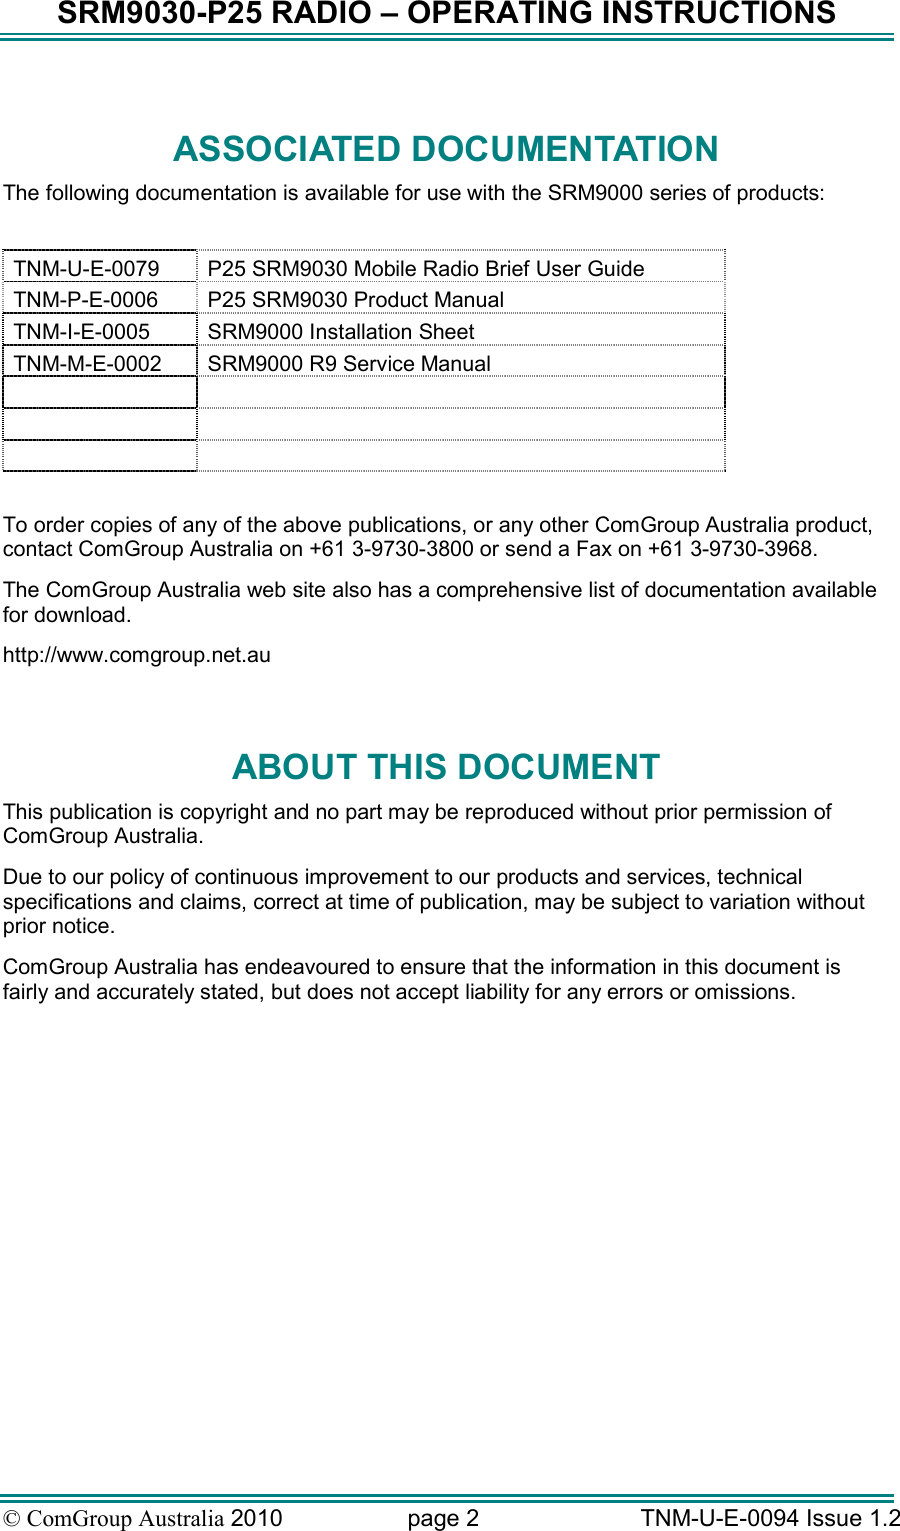 SRM9030-P25 RADIO – OPERATING INSTRUCTIONS © ComGroup Australia 2010  page 2   TNM-U-E-0094 Issue 1.2  ASSOCIATED DOCUMENTATION The following documentation is available for use with the SRM9000 series of products:  TNM-U-E-0079  P25 SRM9030 Mobile Radio Brief User Guide TNM-P-E-0006  P25 SRM9030 Product Manual TNM-I-E-0005  SRM9000 Installation Sheet TNM-M-E-0002  SRM9000 R9 Service Manual           To order copies of any of the above publications, or any other ComGroup Australia product, contact ComGroup Australia on +61 3-9730-3800 or send a Fax on +61 3-9730-3968. The ComGroup Australia web site also has a comprehensive list of documentation available for download. http://www.comgroup.net.au  ABOUT THIS DOCUMENT This publication is copyright and no part may be reproduced without prior permission of ComGroup Australia. Due to our policy of continuous improvement to our products and services, technical specifications and claims, correct at time of publication, may be subject to variation without prior notice.   ComGroup Australia has endeavoured to ensure that the information in this document is fairly and accurately stated, but does not accept liability for any errors or omissions.    